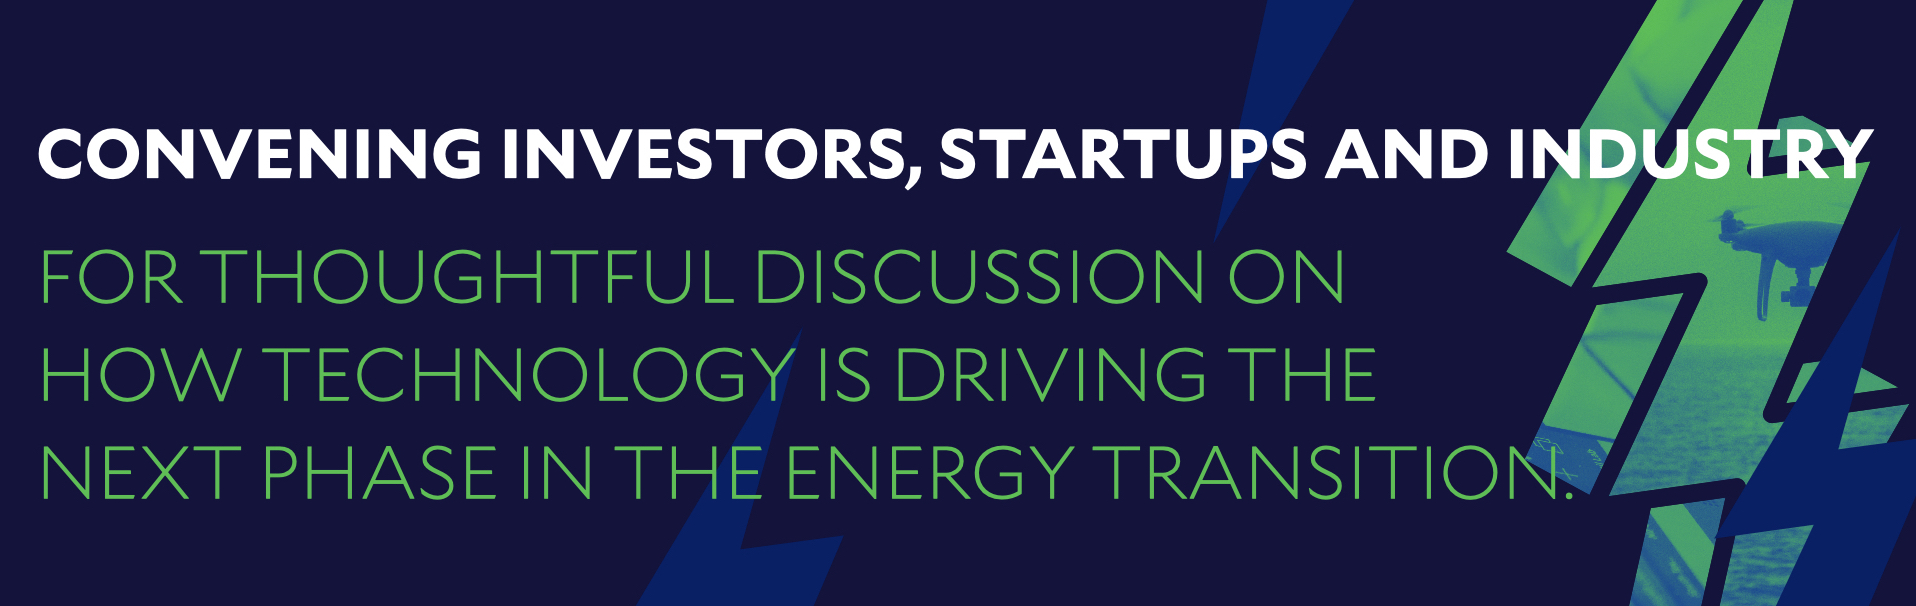 Convening Investors, Startups and Industry 